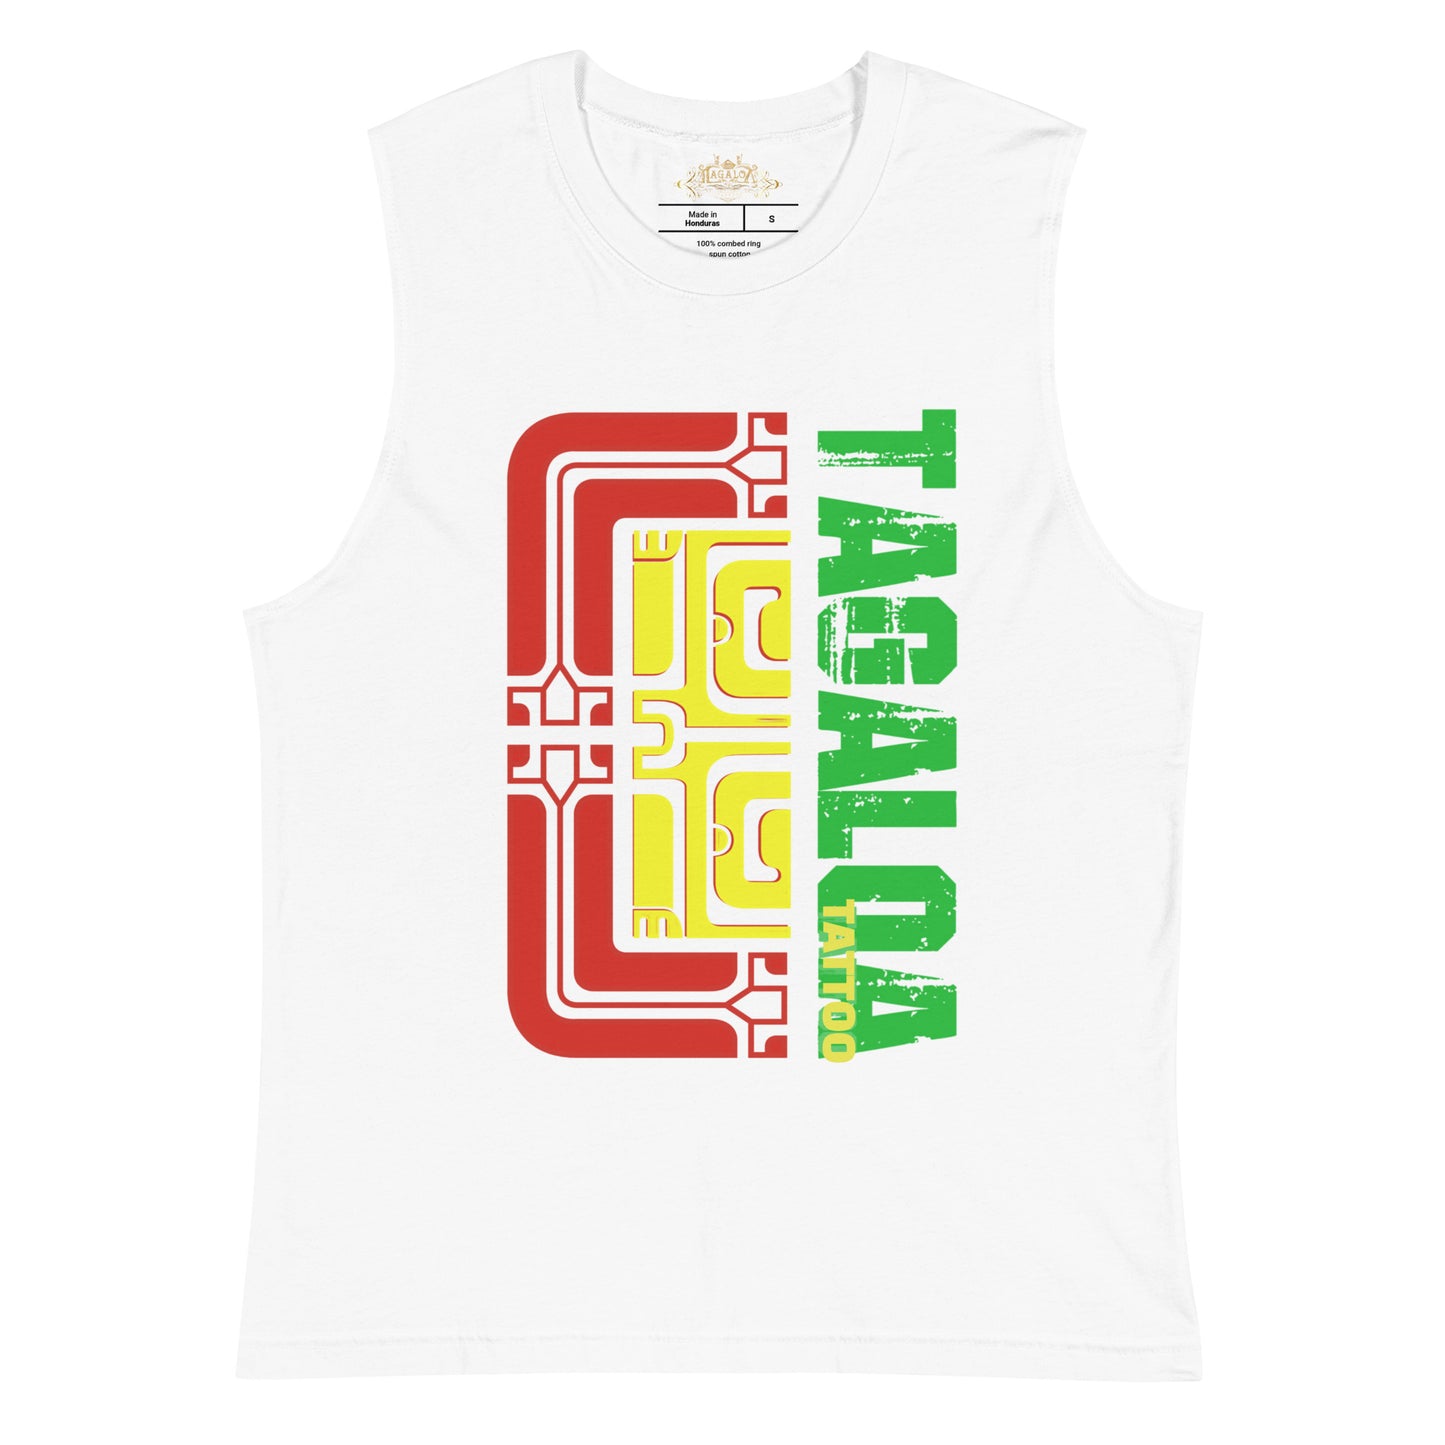 Vibrant Tagaloa Tattoo Tank Top in Green, Yellow, and Red